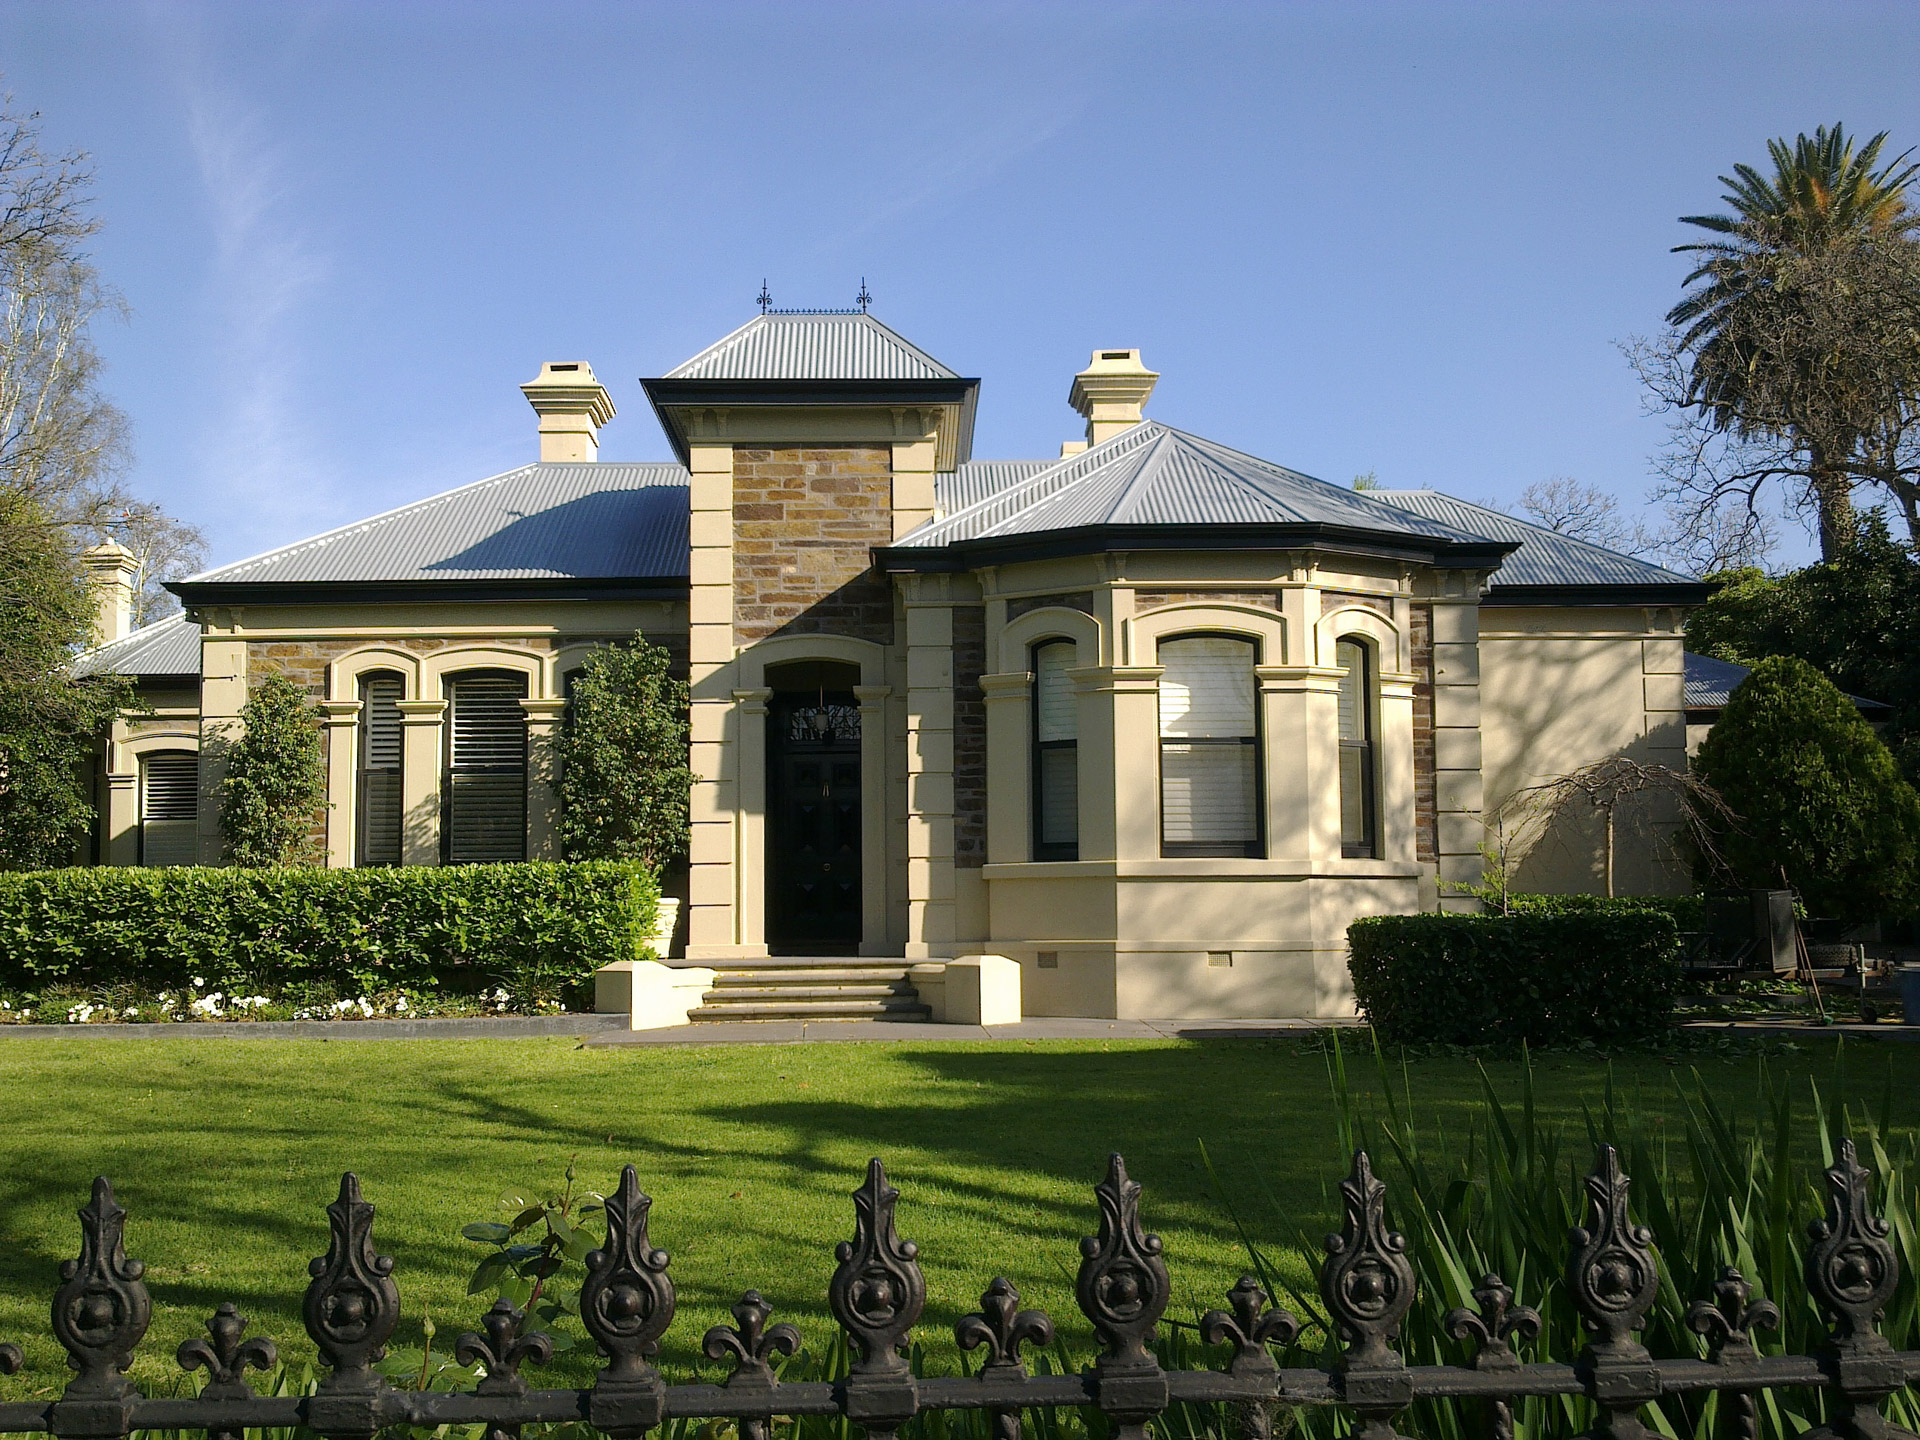 One of many distinctive old homes found in Adelaide